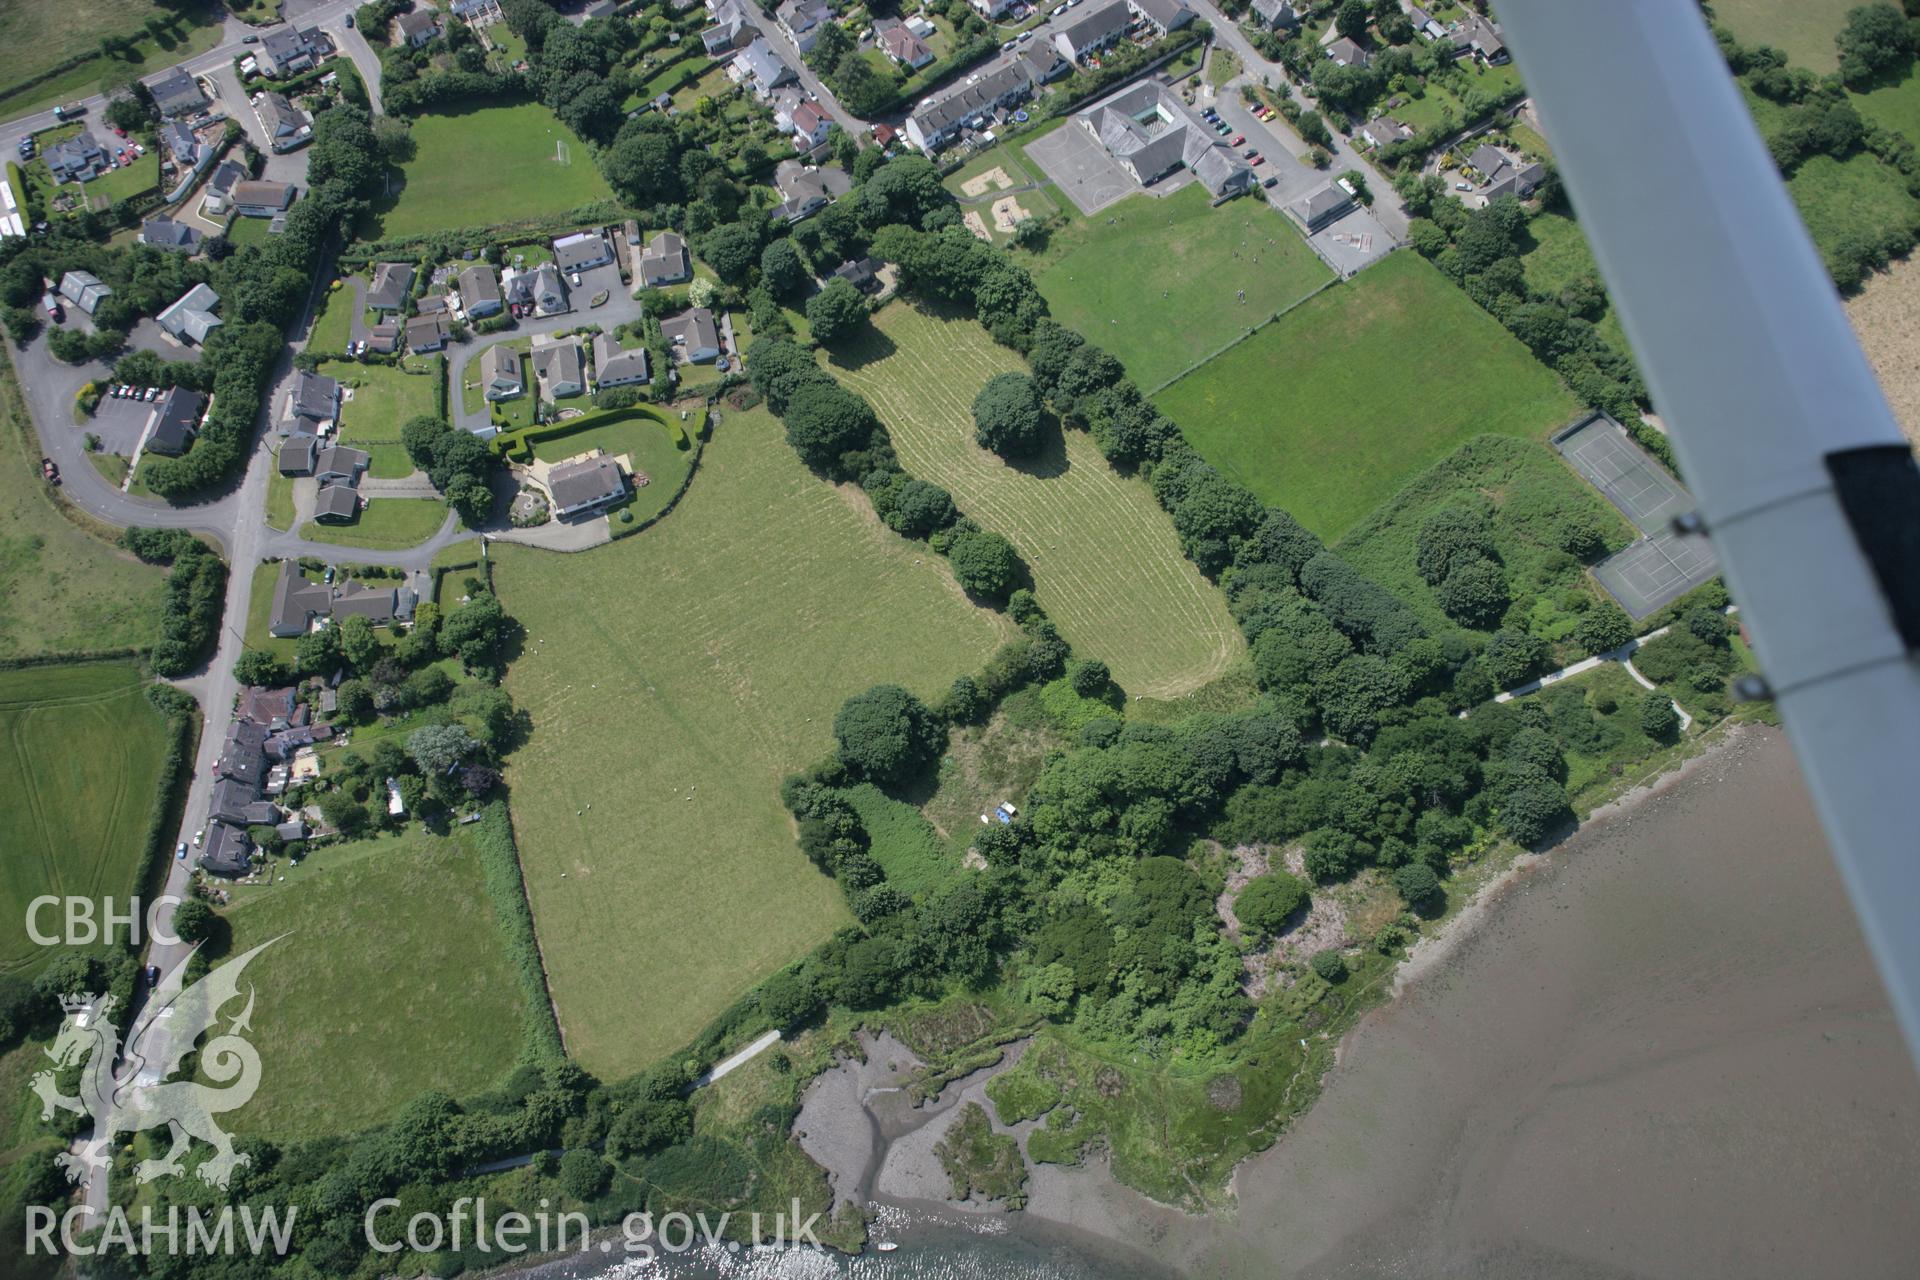 RCAHMW colour oblique aerial photograph of showing ringwork of Old Castle, Newport, viewed from the north-east. Taken on 11 July 2005 by Toby Driver